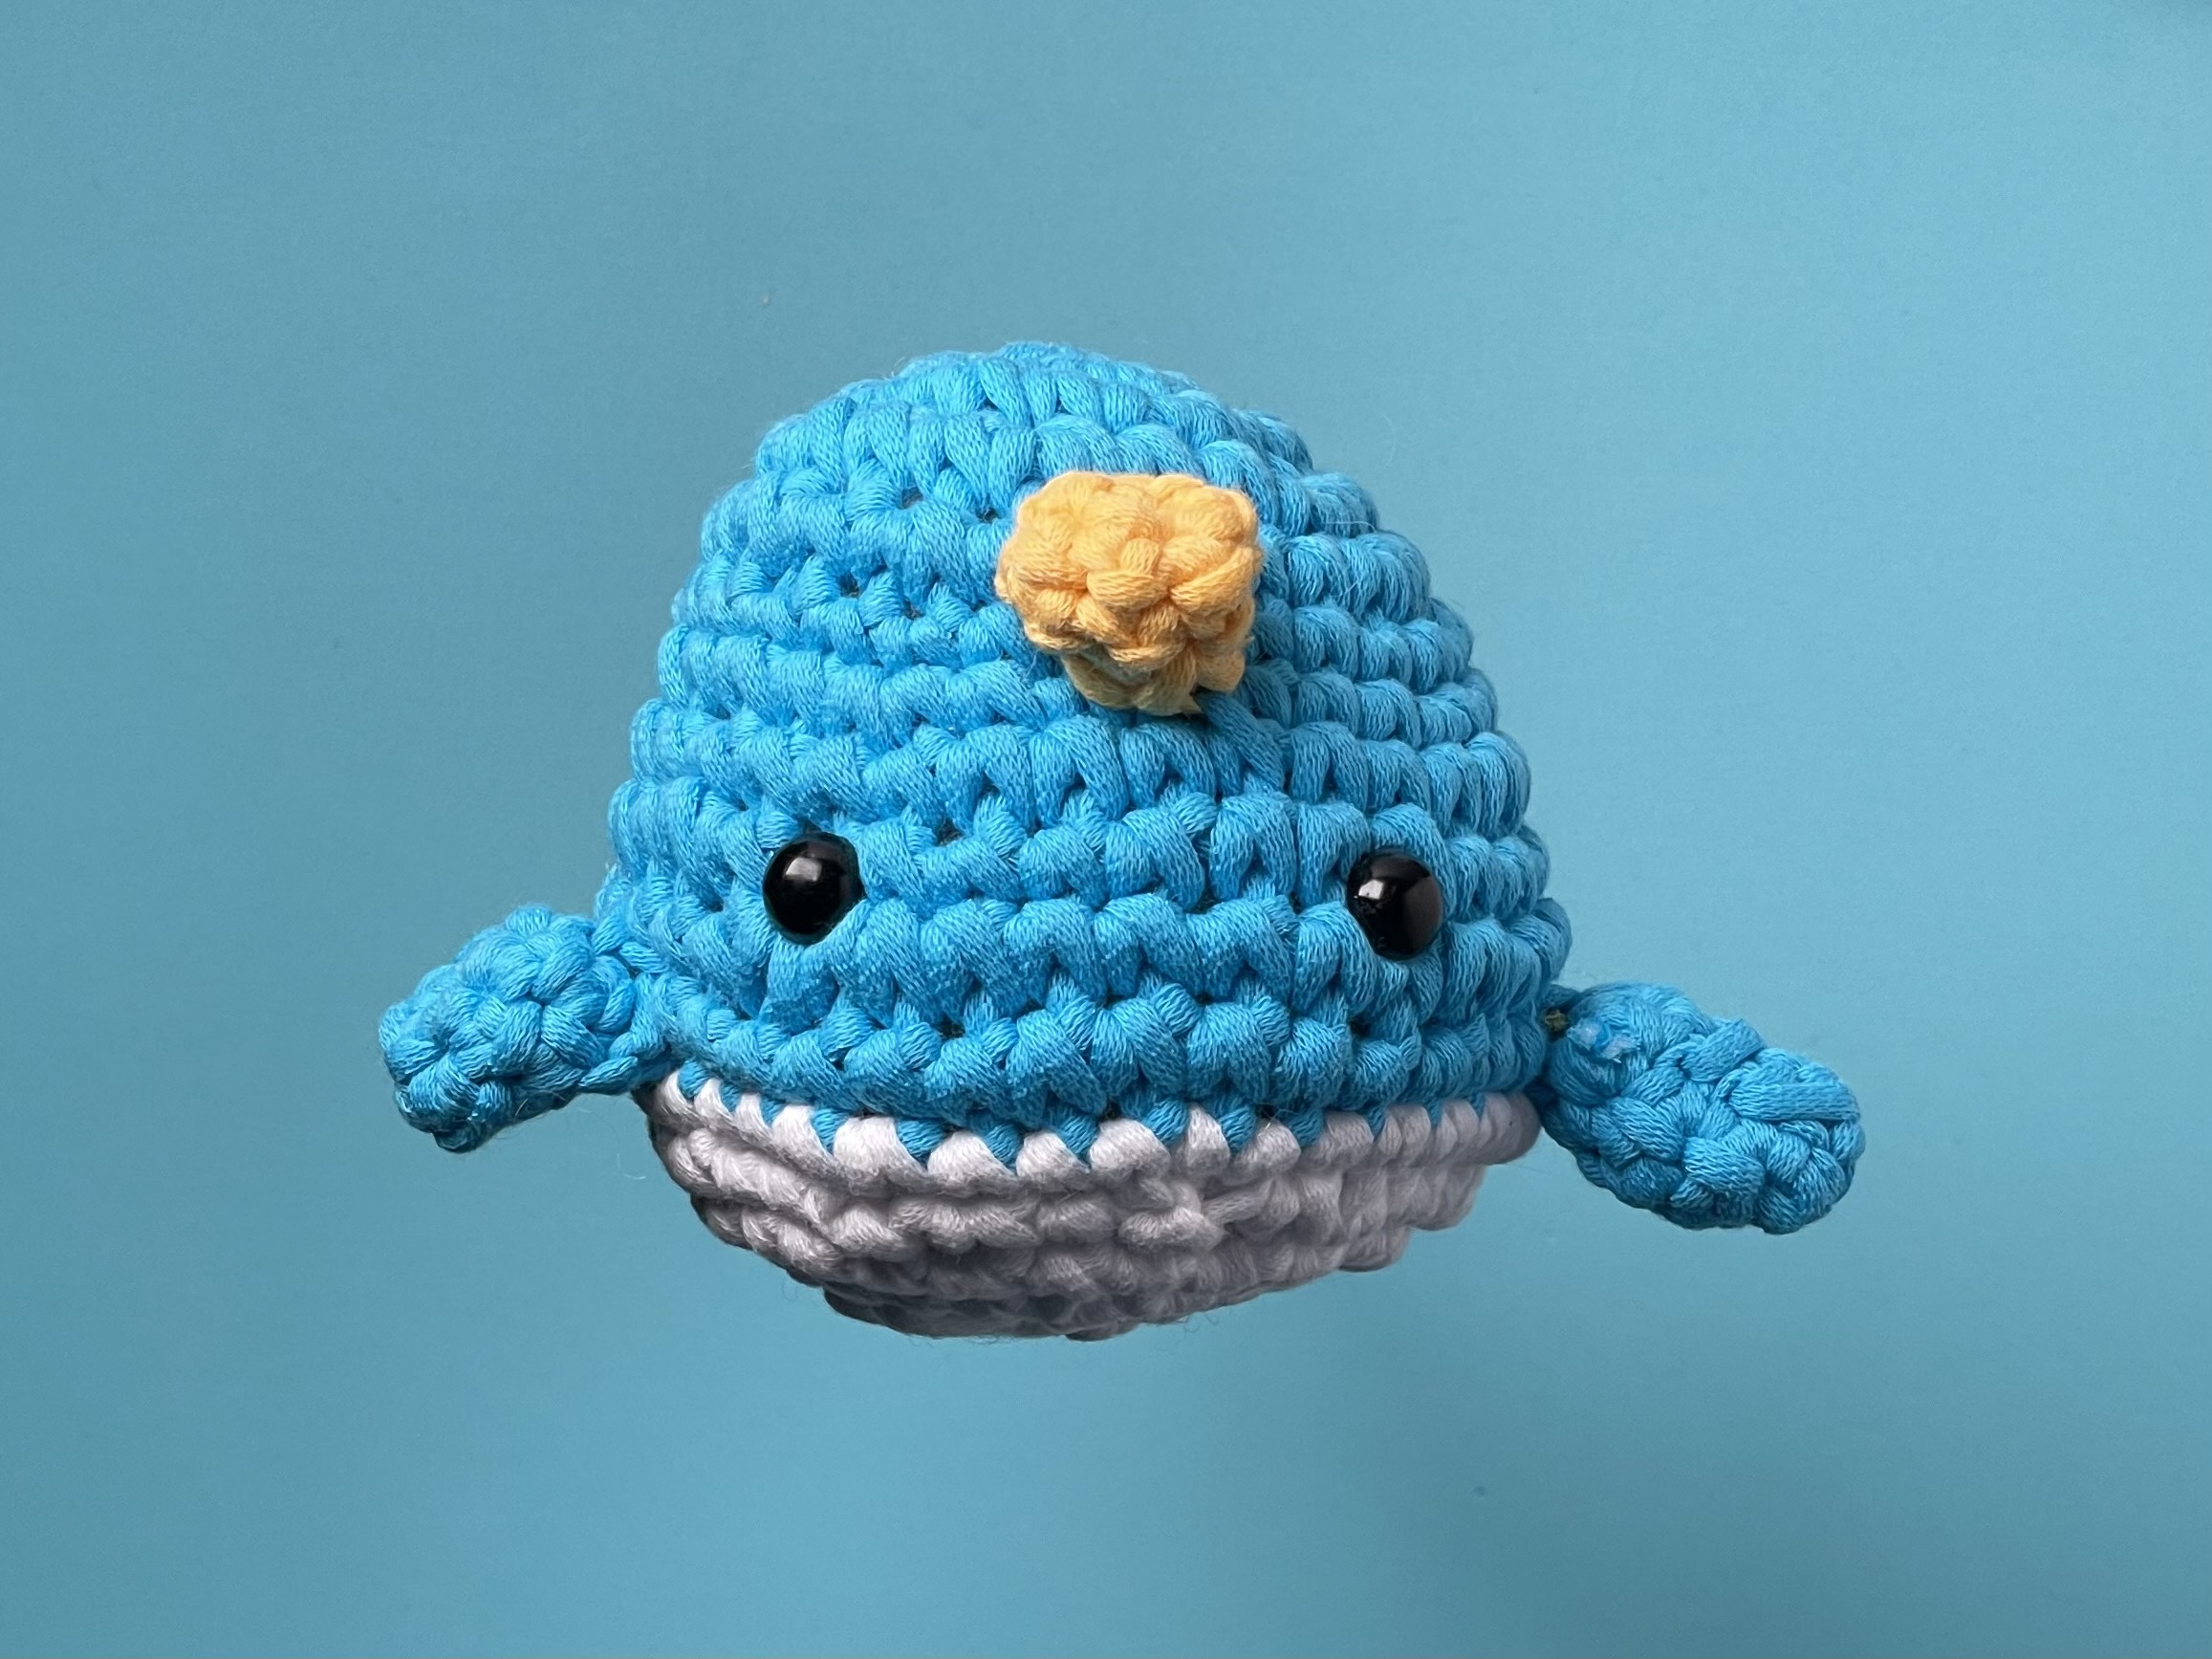 How To: Pattern vs Reality Review 1: The Woobles Narwhal